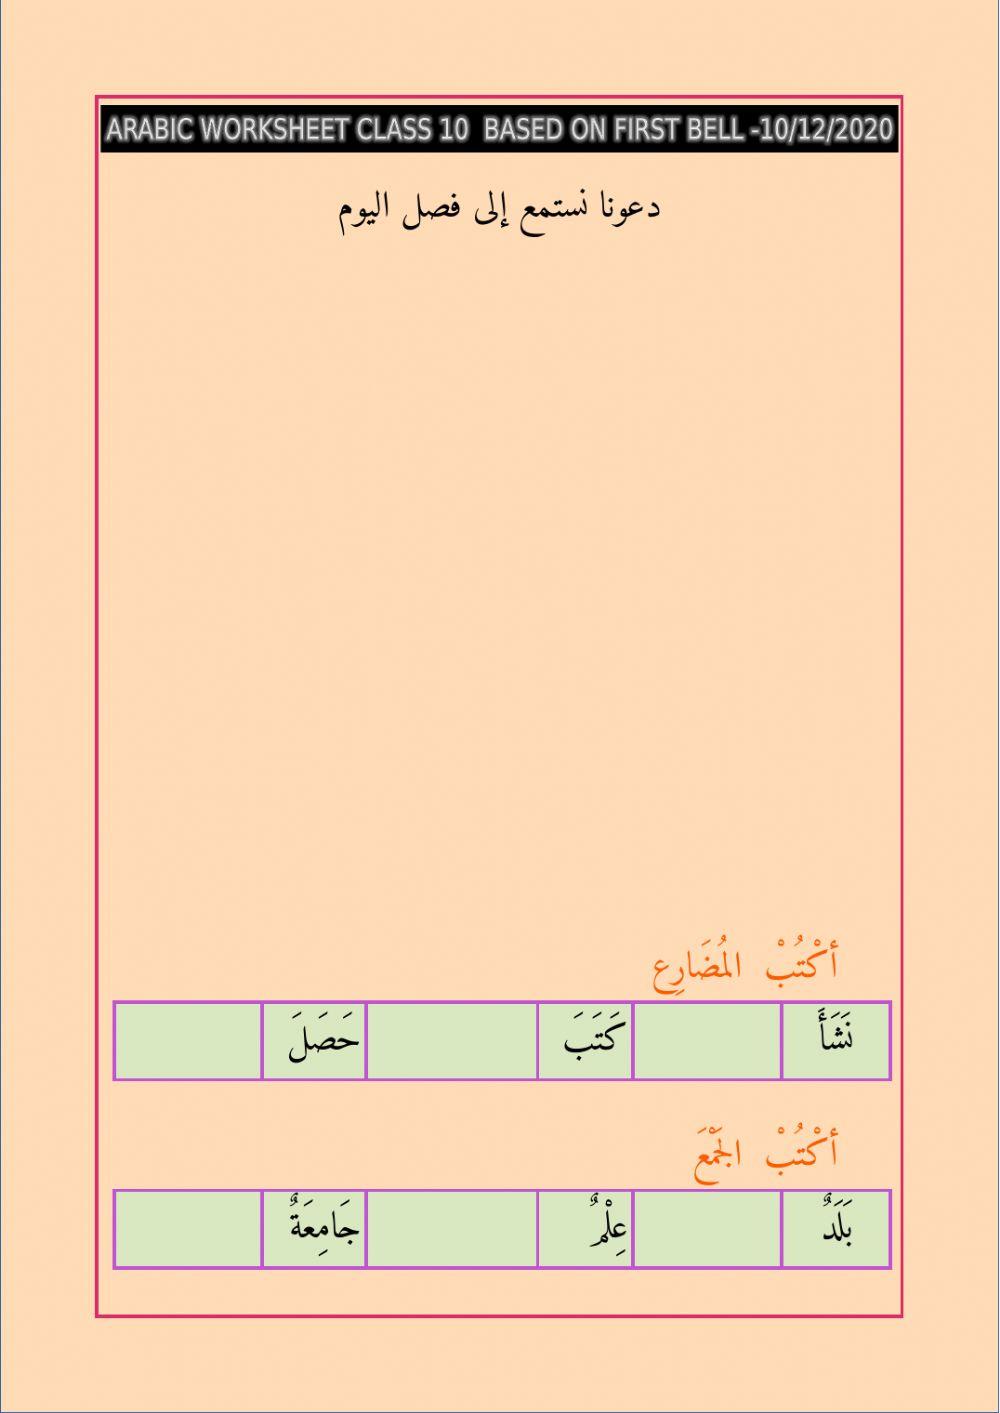 Arabic worksheet class 10 unit 3 based on firstbell dec10